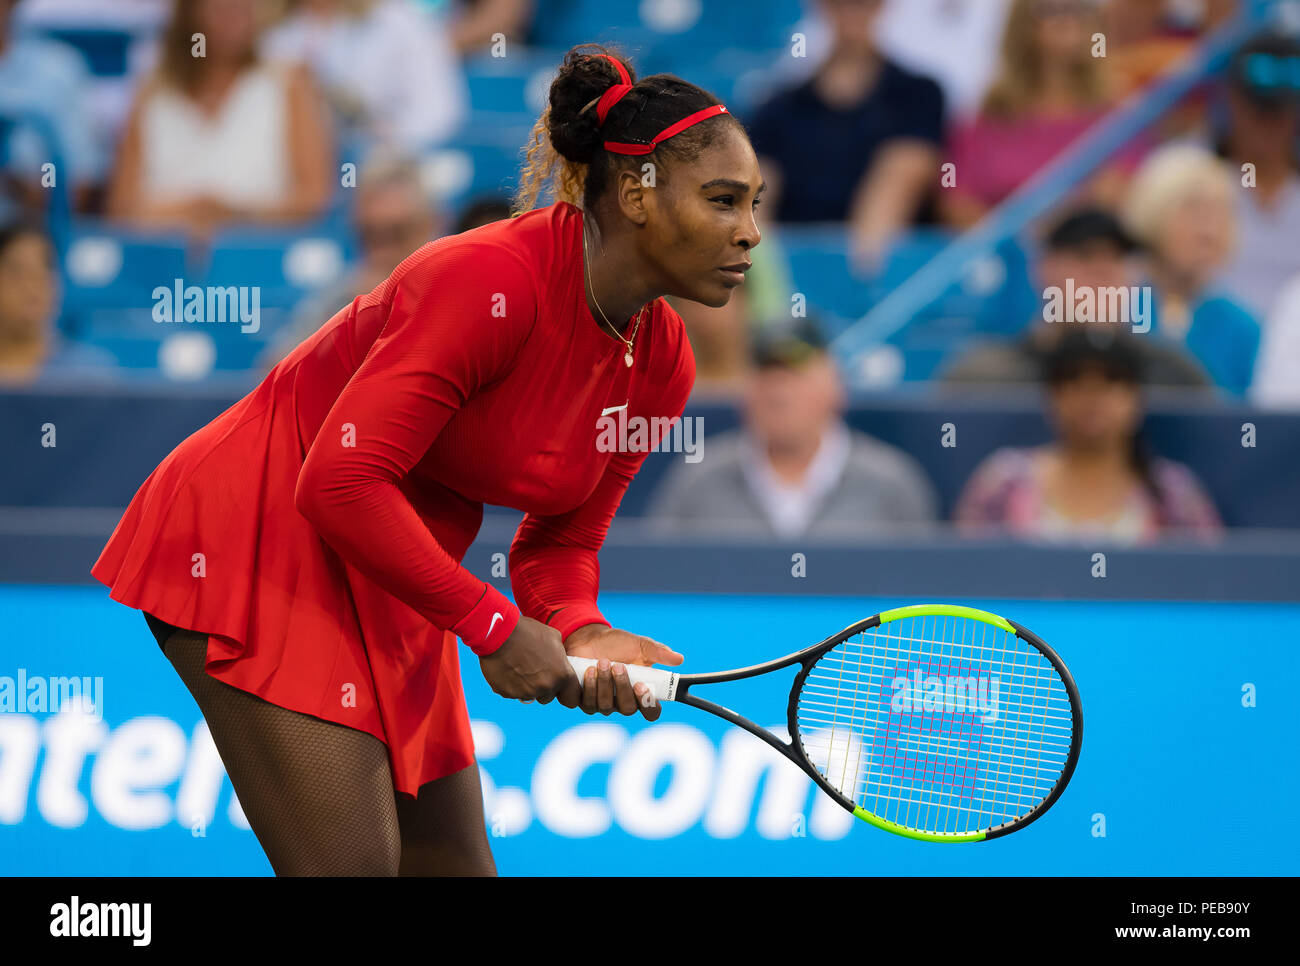 Cincinnati, OH, USA. 13th Aug, 2018. Serena Williams of the United States  in action during her first round match at the 2018 Western & Southern Open WTA  Premier 5 tennis tournament. Cincinnati,